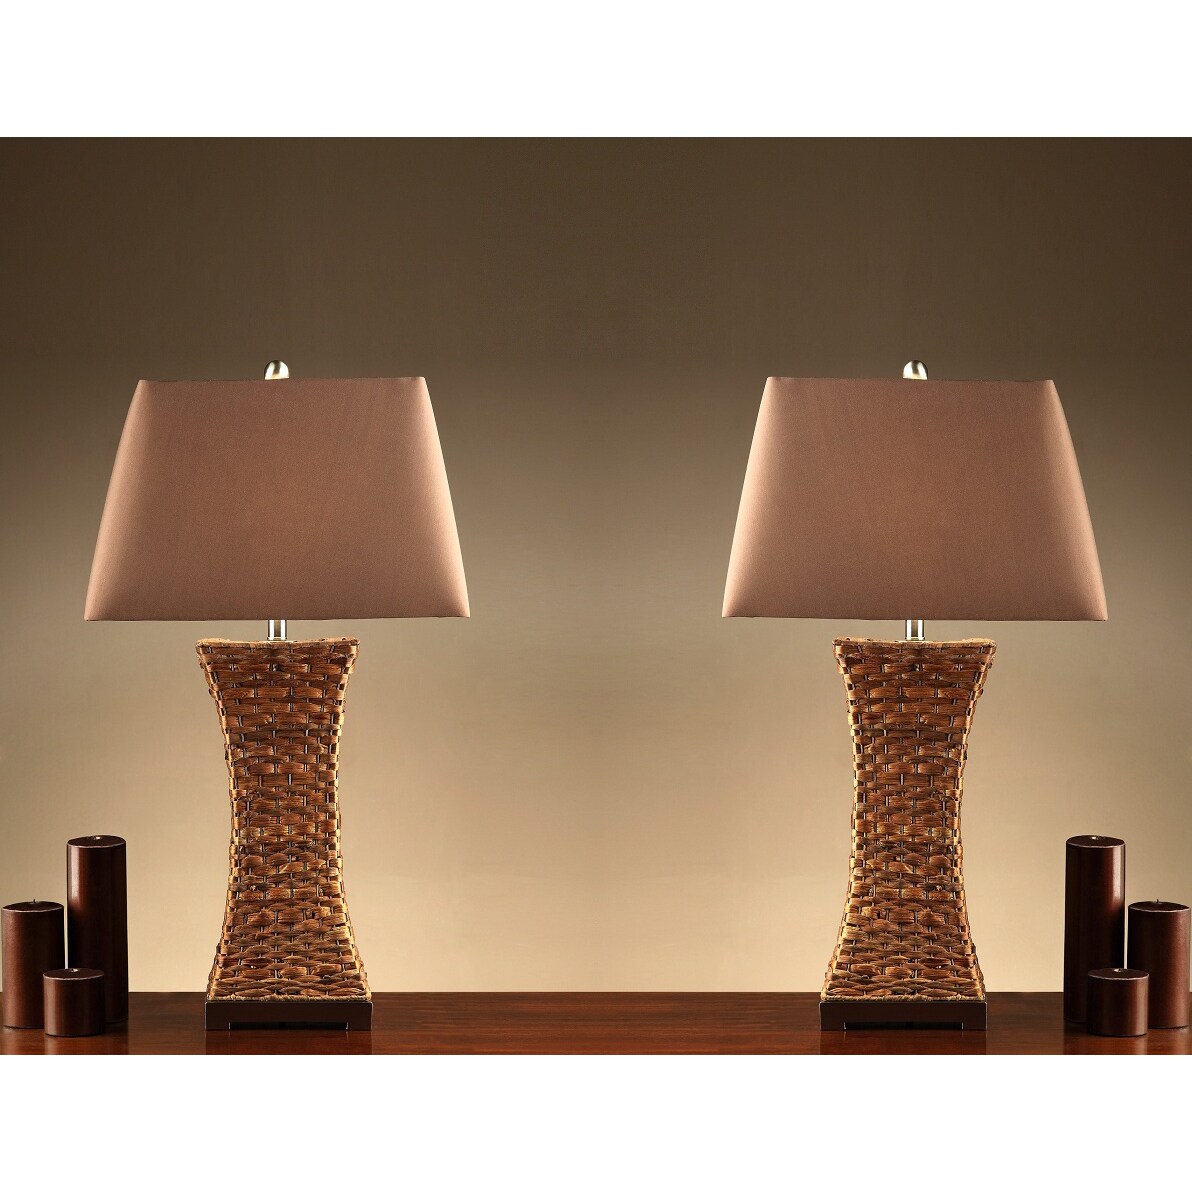 Wiki 35 inch Table Lamps (Set of 2) Today $169.99